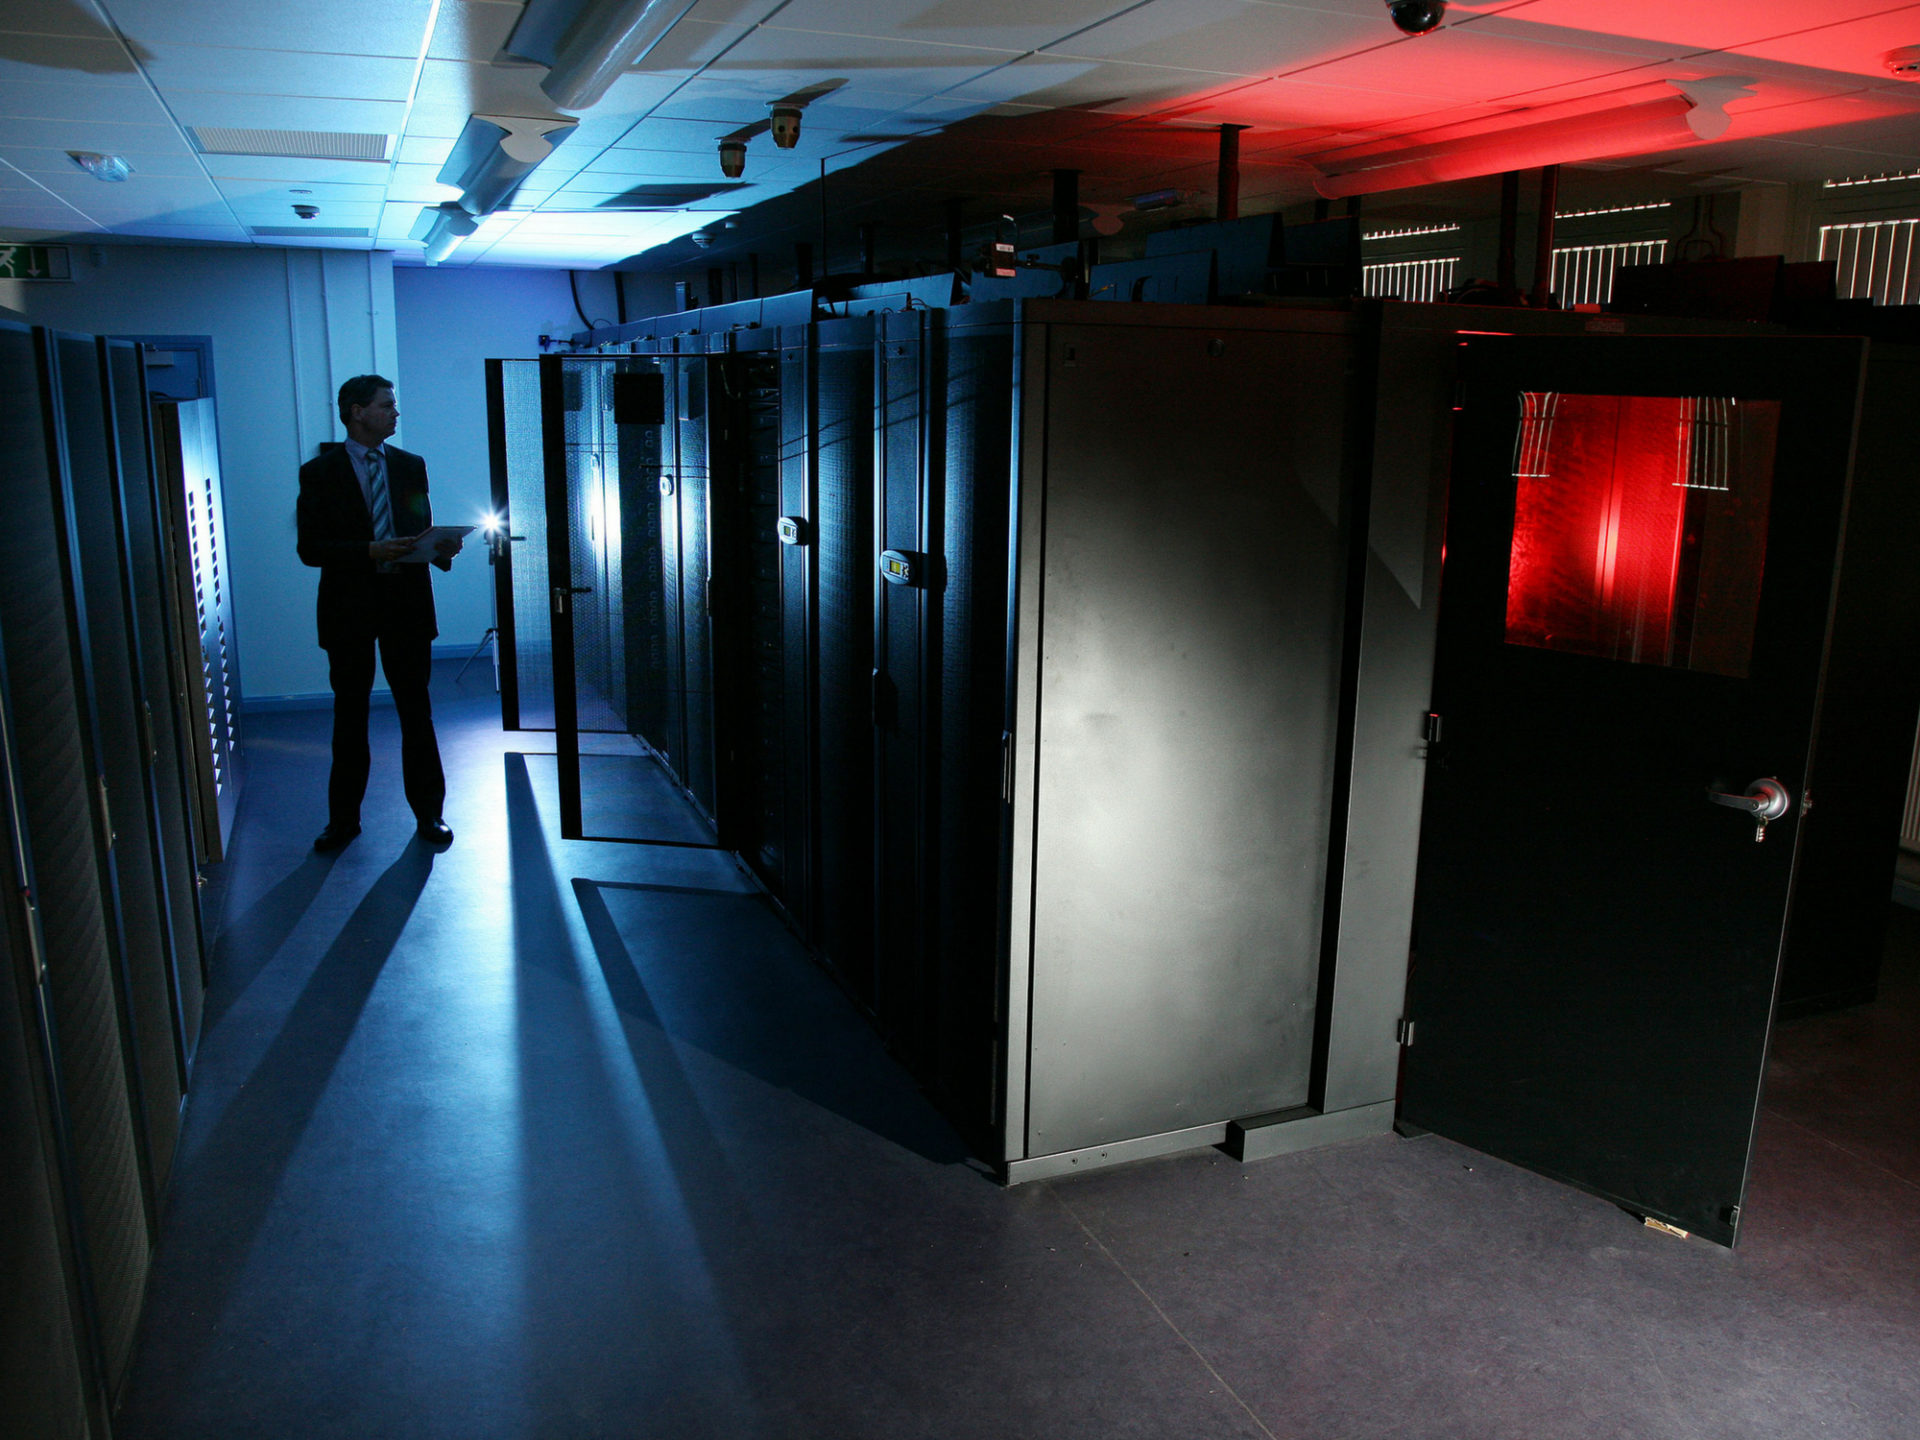 ISAMBARD COULD BE THE START OF A ‘NEW GENERATION’ OF SUPERCOMPUTERS